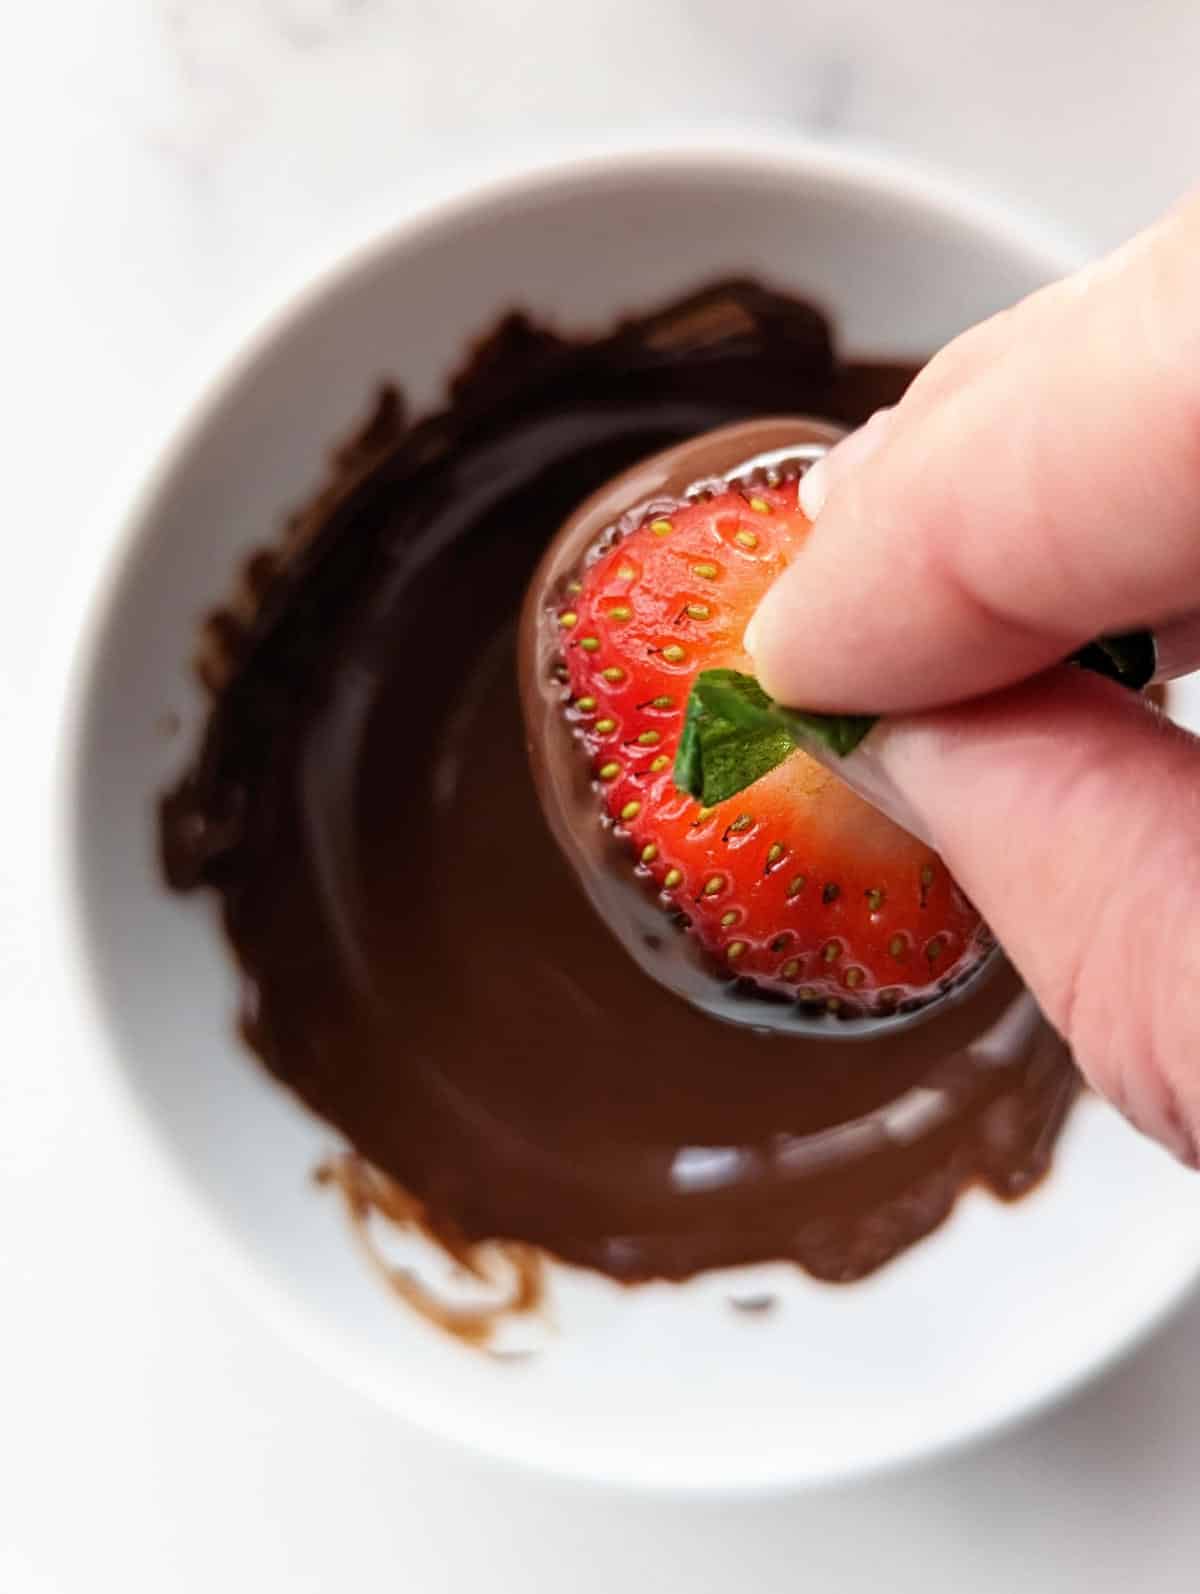 Hand holding dipped strawberry over chocolate bowl to allow excess chocolate to fall off.